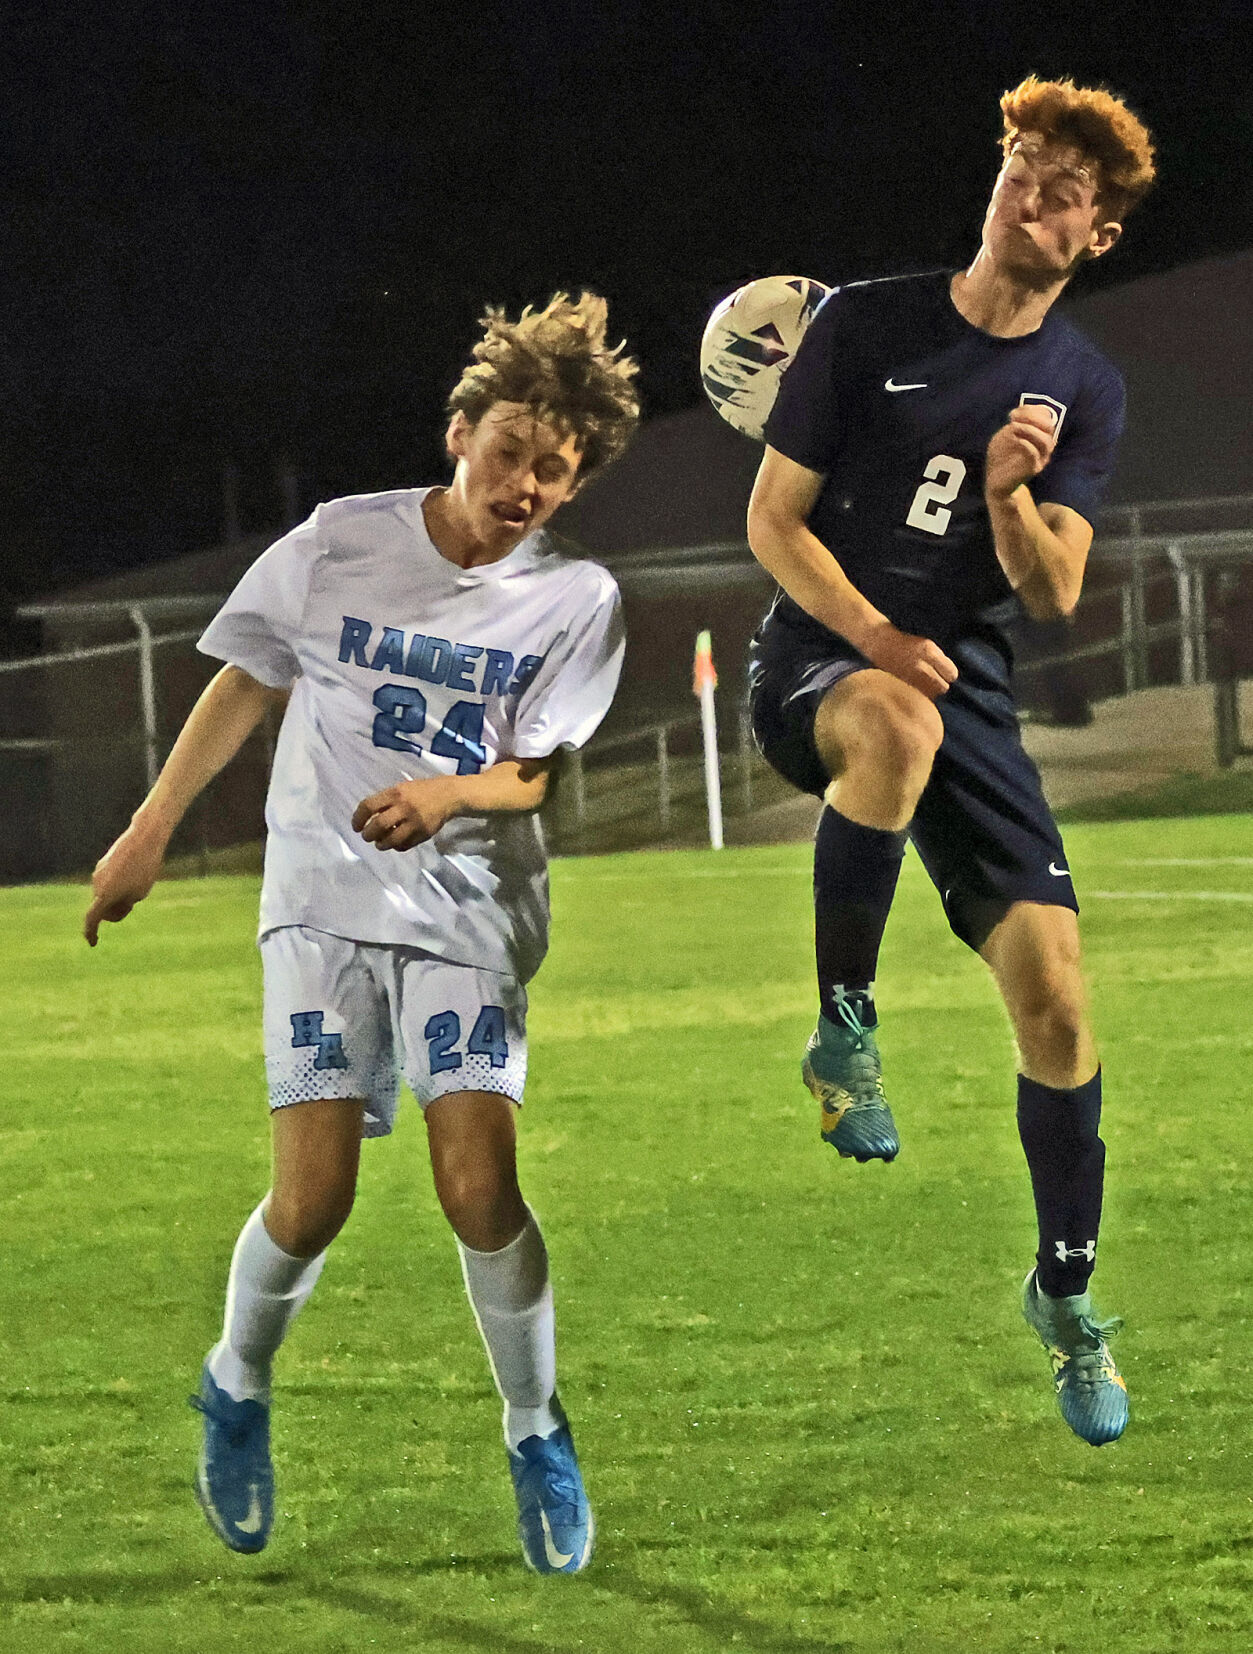 Providence Christian Edges Out Houston Academy in Hard-Fought Soccer Victory